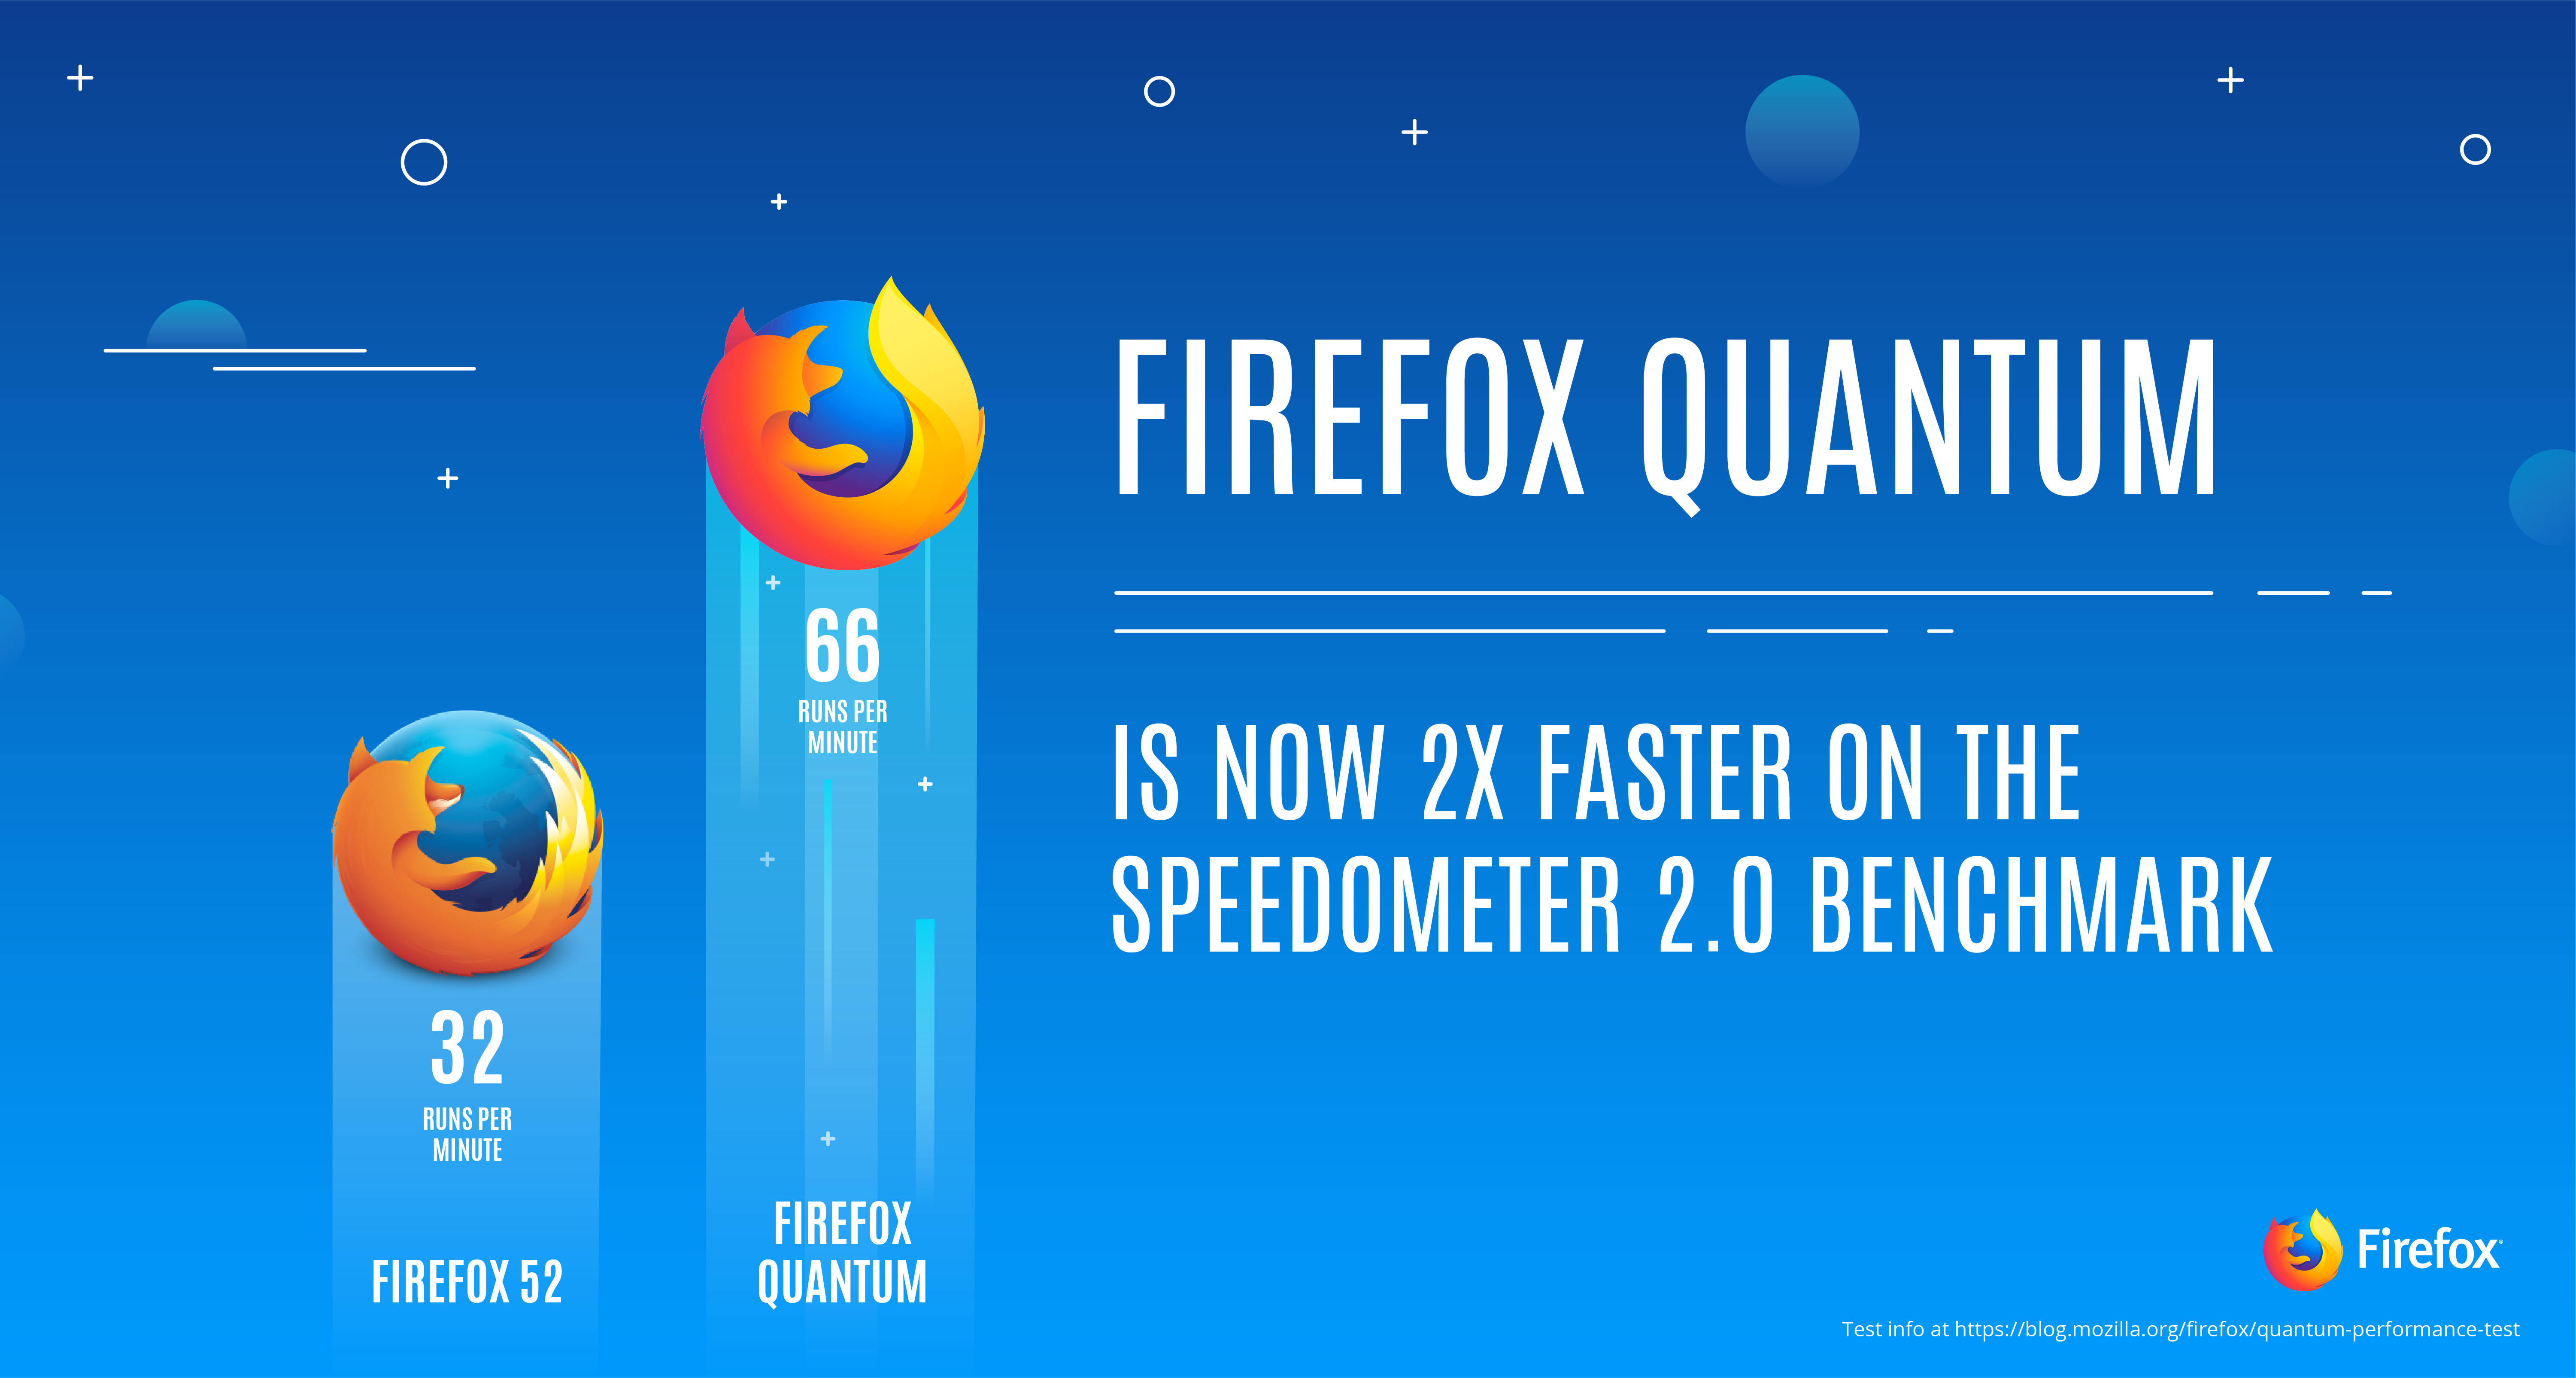 Mozilla looks to challenge Chrome with Firefox Quantum